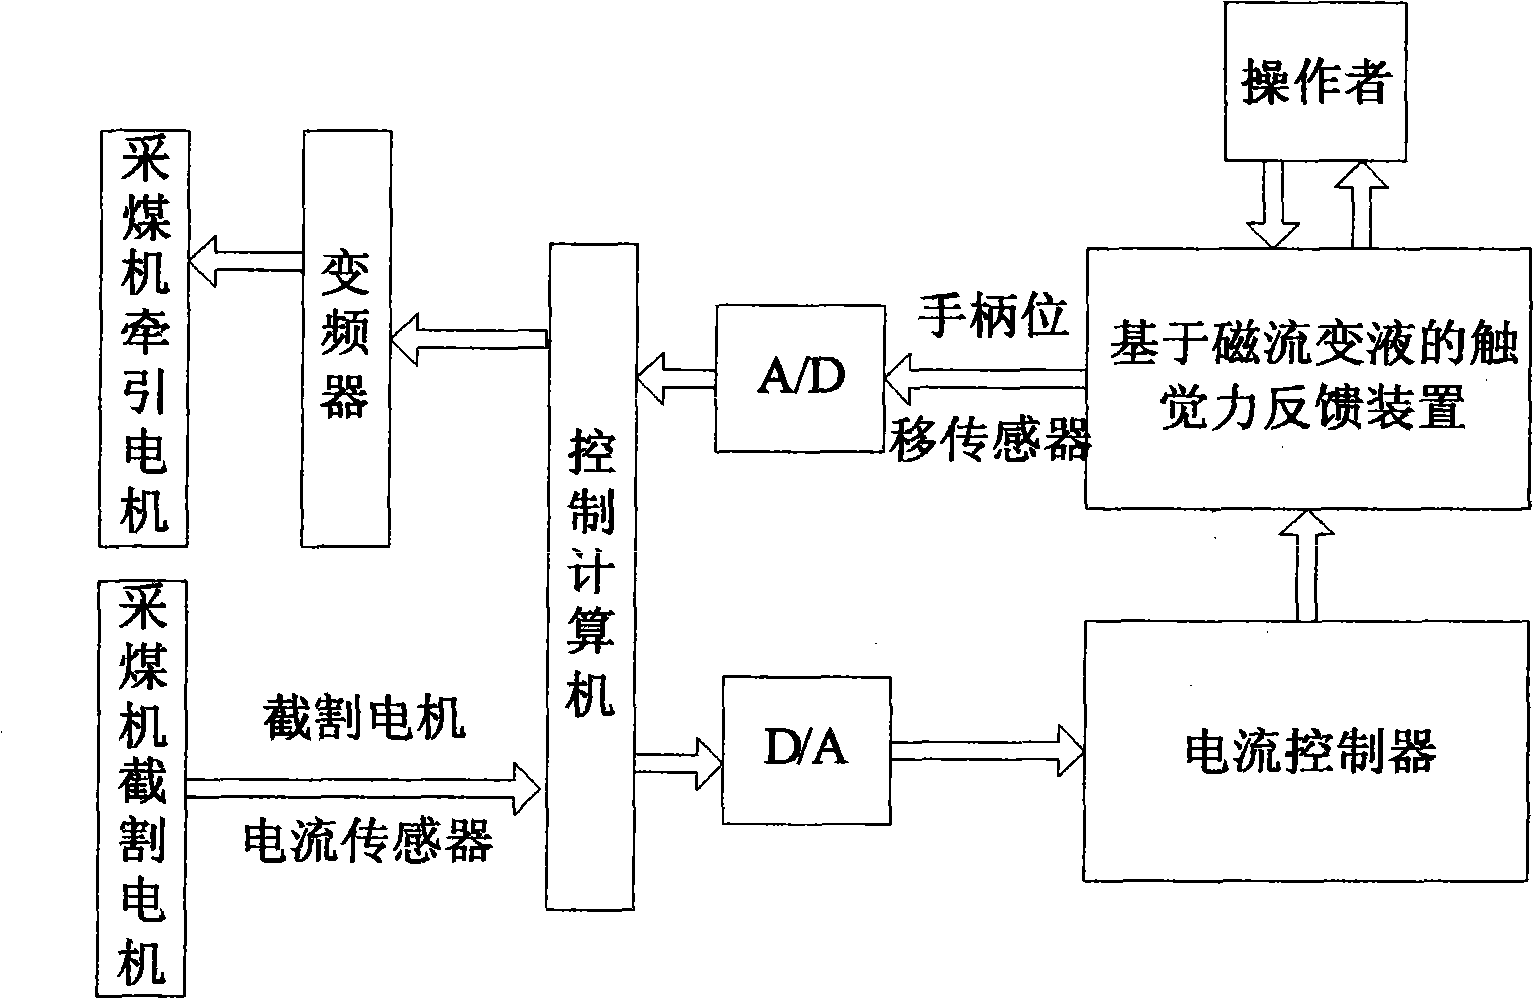 Constant power control method for coal mining machine and operating handle